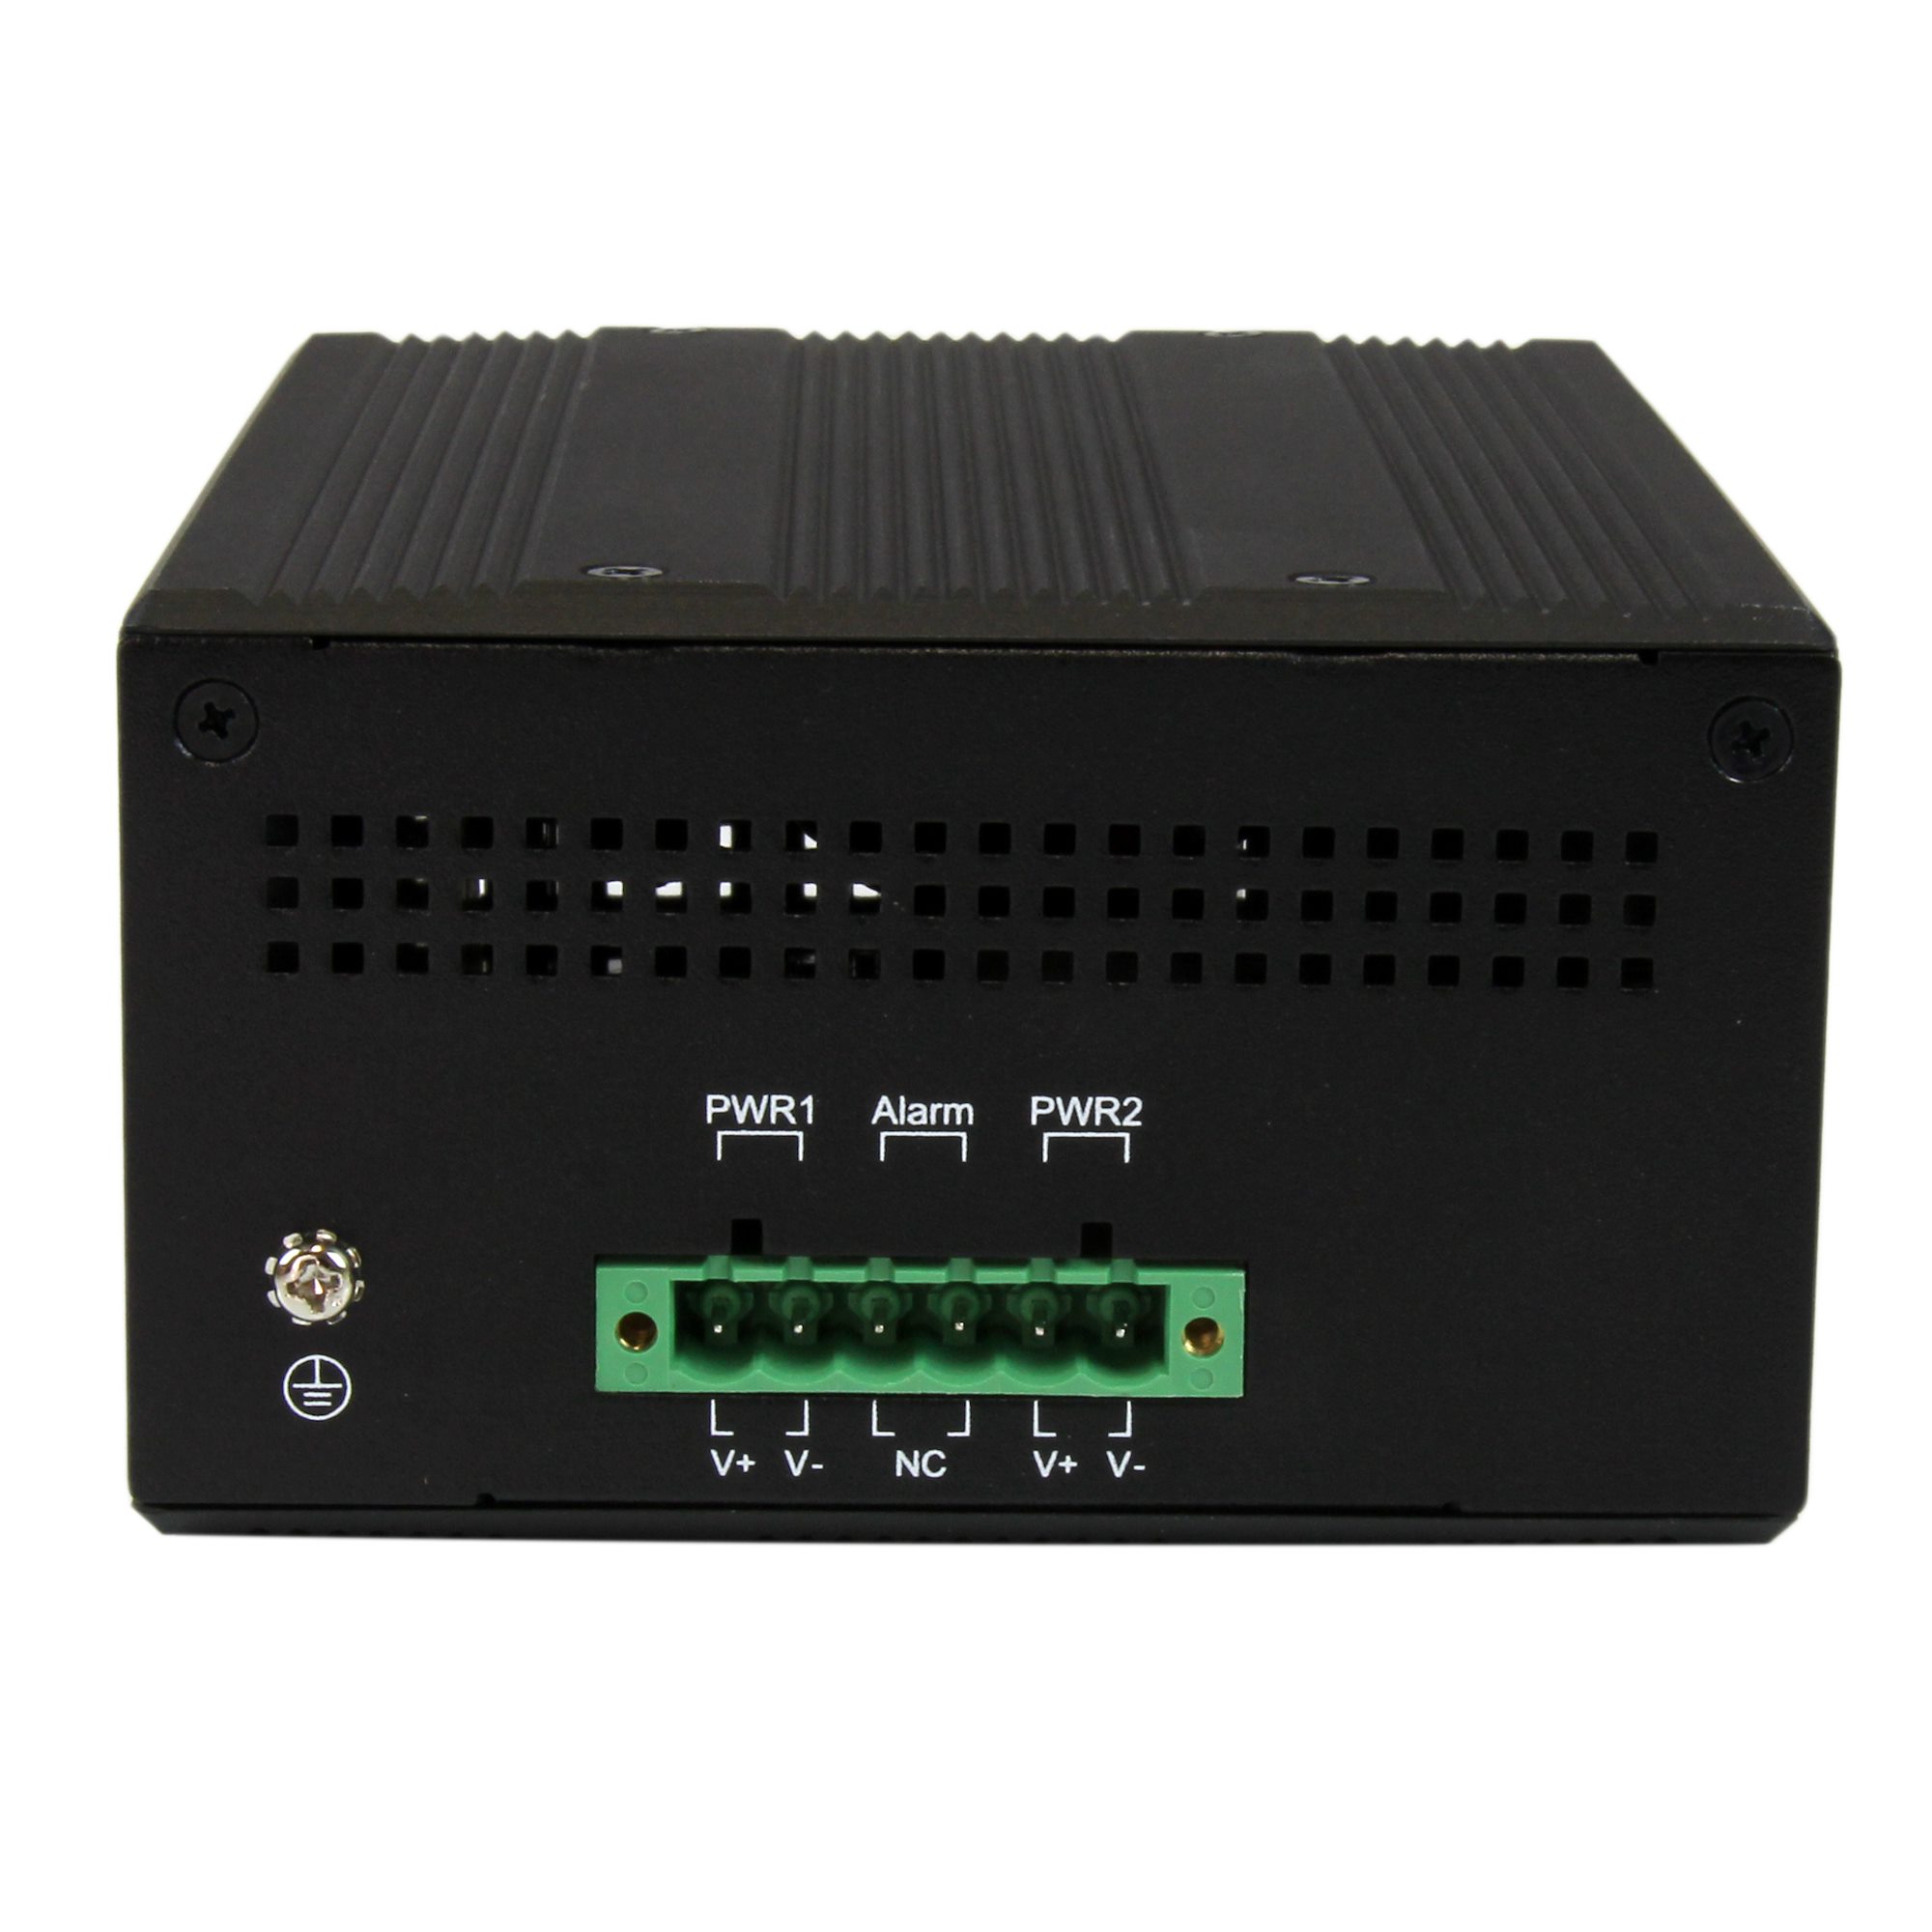 6 Port Ethernet Switch with 4 PoE+ Ports - Ethernet Switches